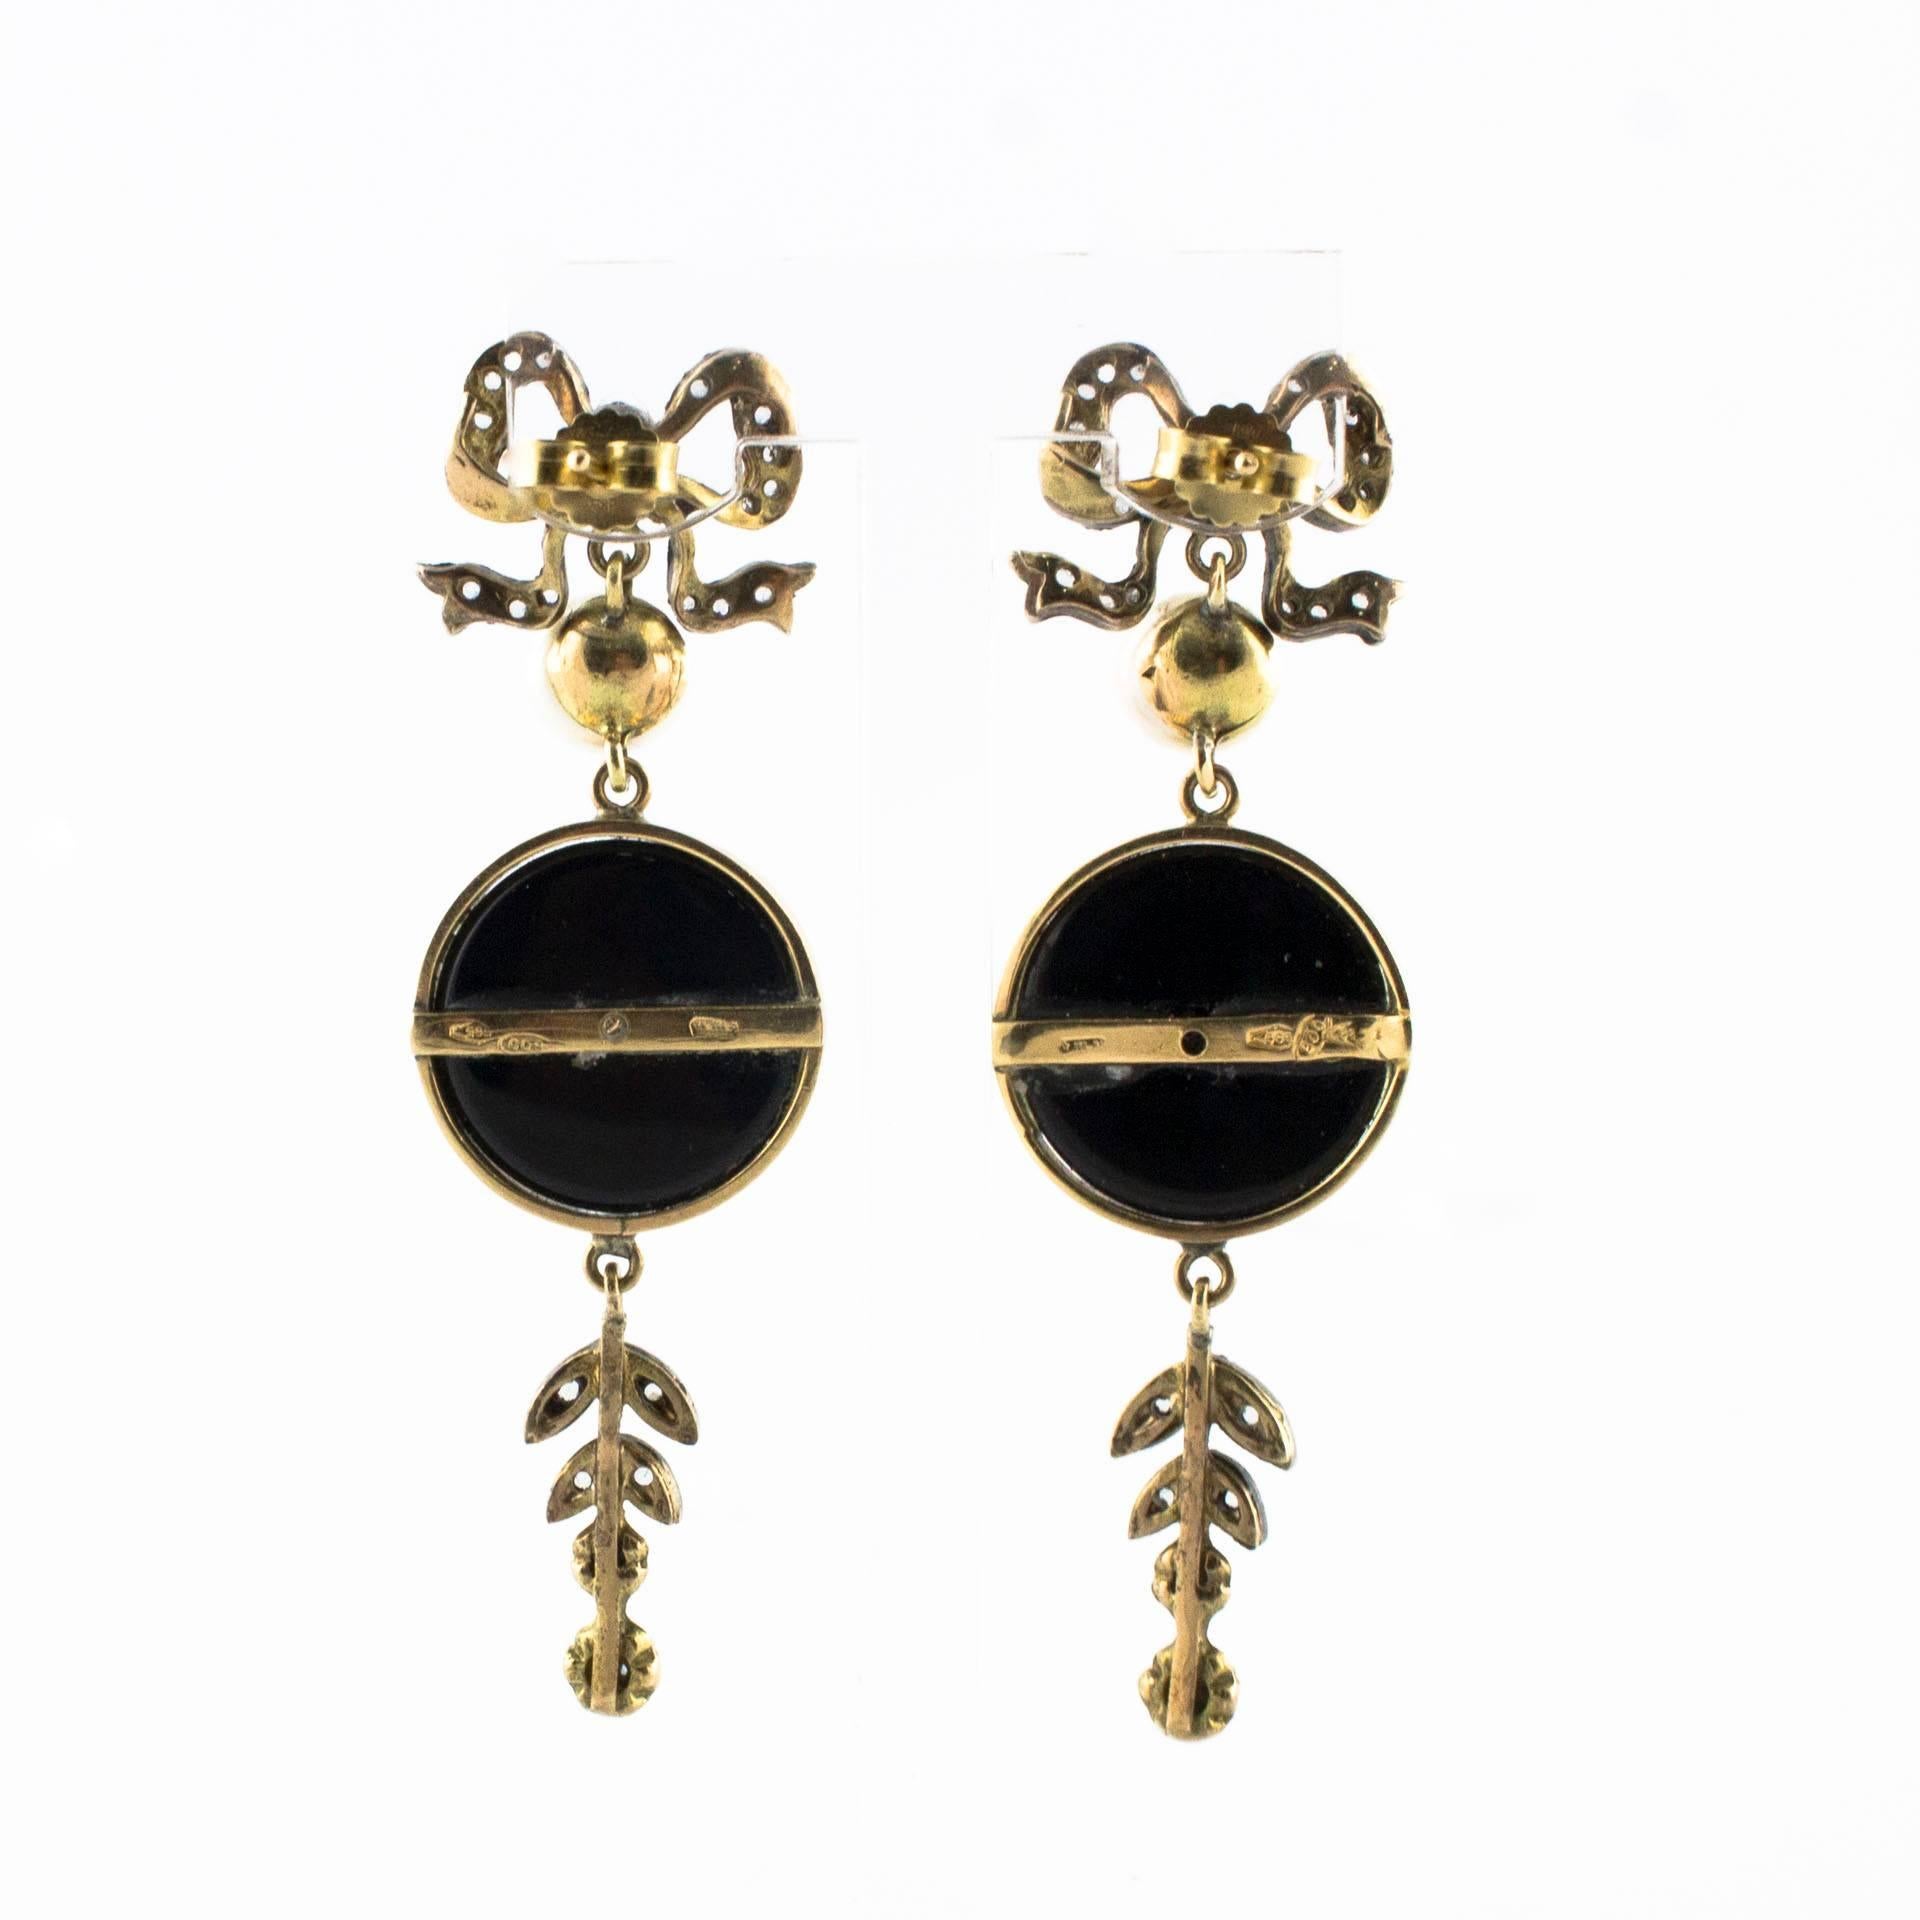 Earrings in Victorian style in gold and silver, romantic in their style, enriched with diamonds, 0.8 mm pearls and sapphires with a central onyx, all surrounded by flowers and leaves that delineate their refinement.
Total weight :7.18
Diamonds